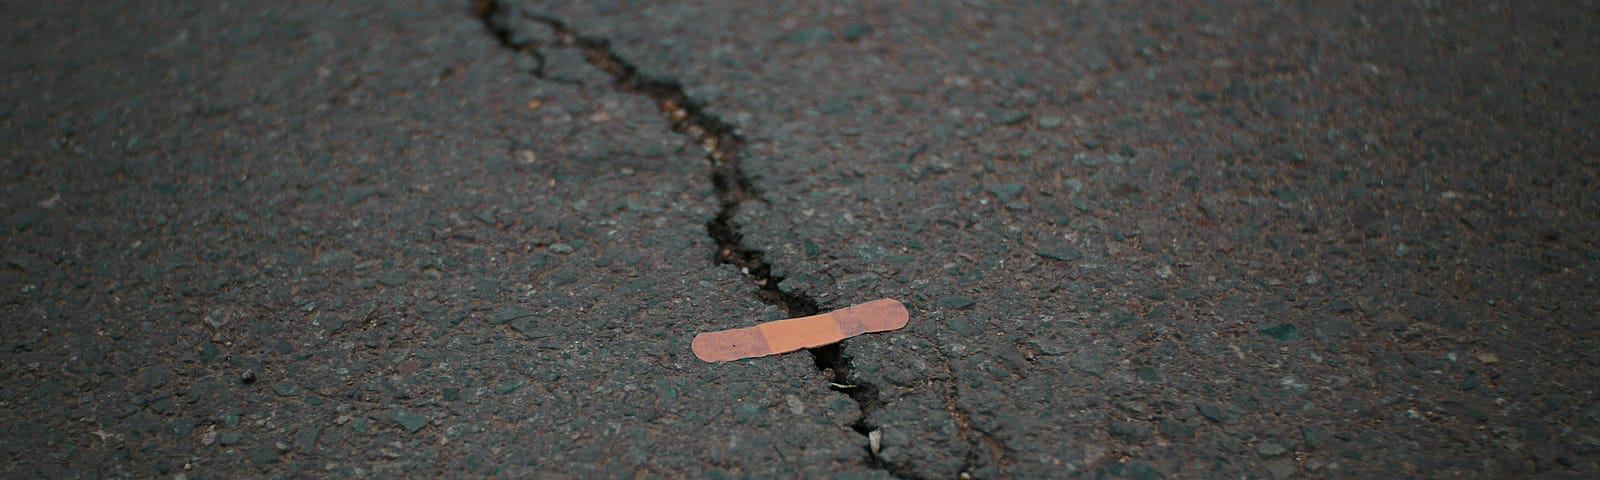 A jagged crack in the road with a Band Aid crossing it.